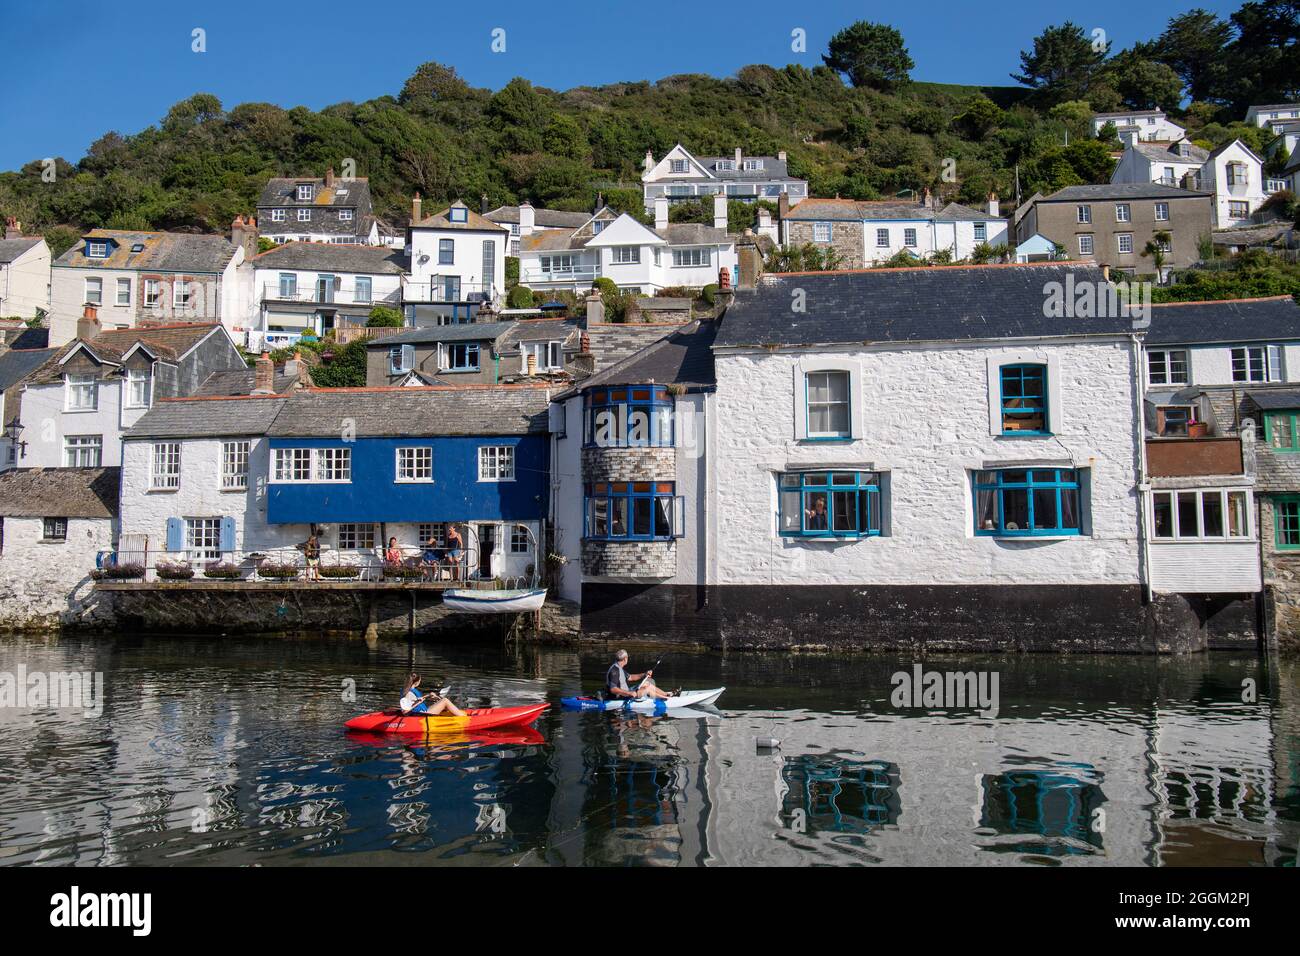 Polperro is a large village, civil parish, and fishing harbour within the Polperro Heritage Coastline in south Cornwall, England. Its population is ar Stock Photo